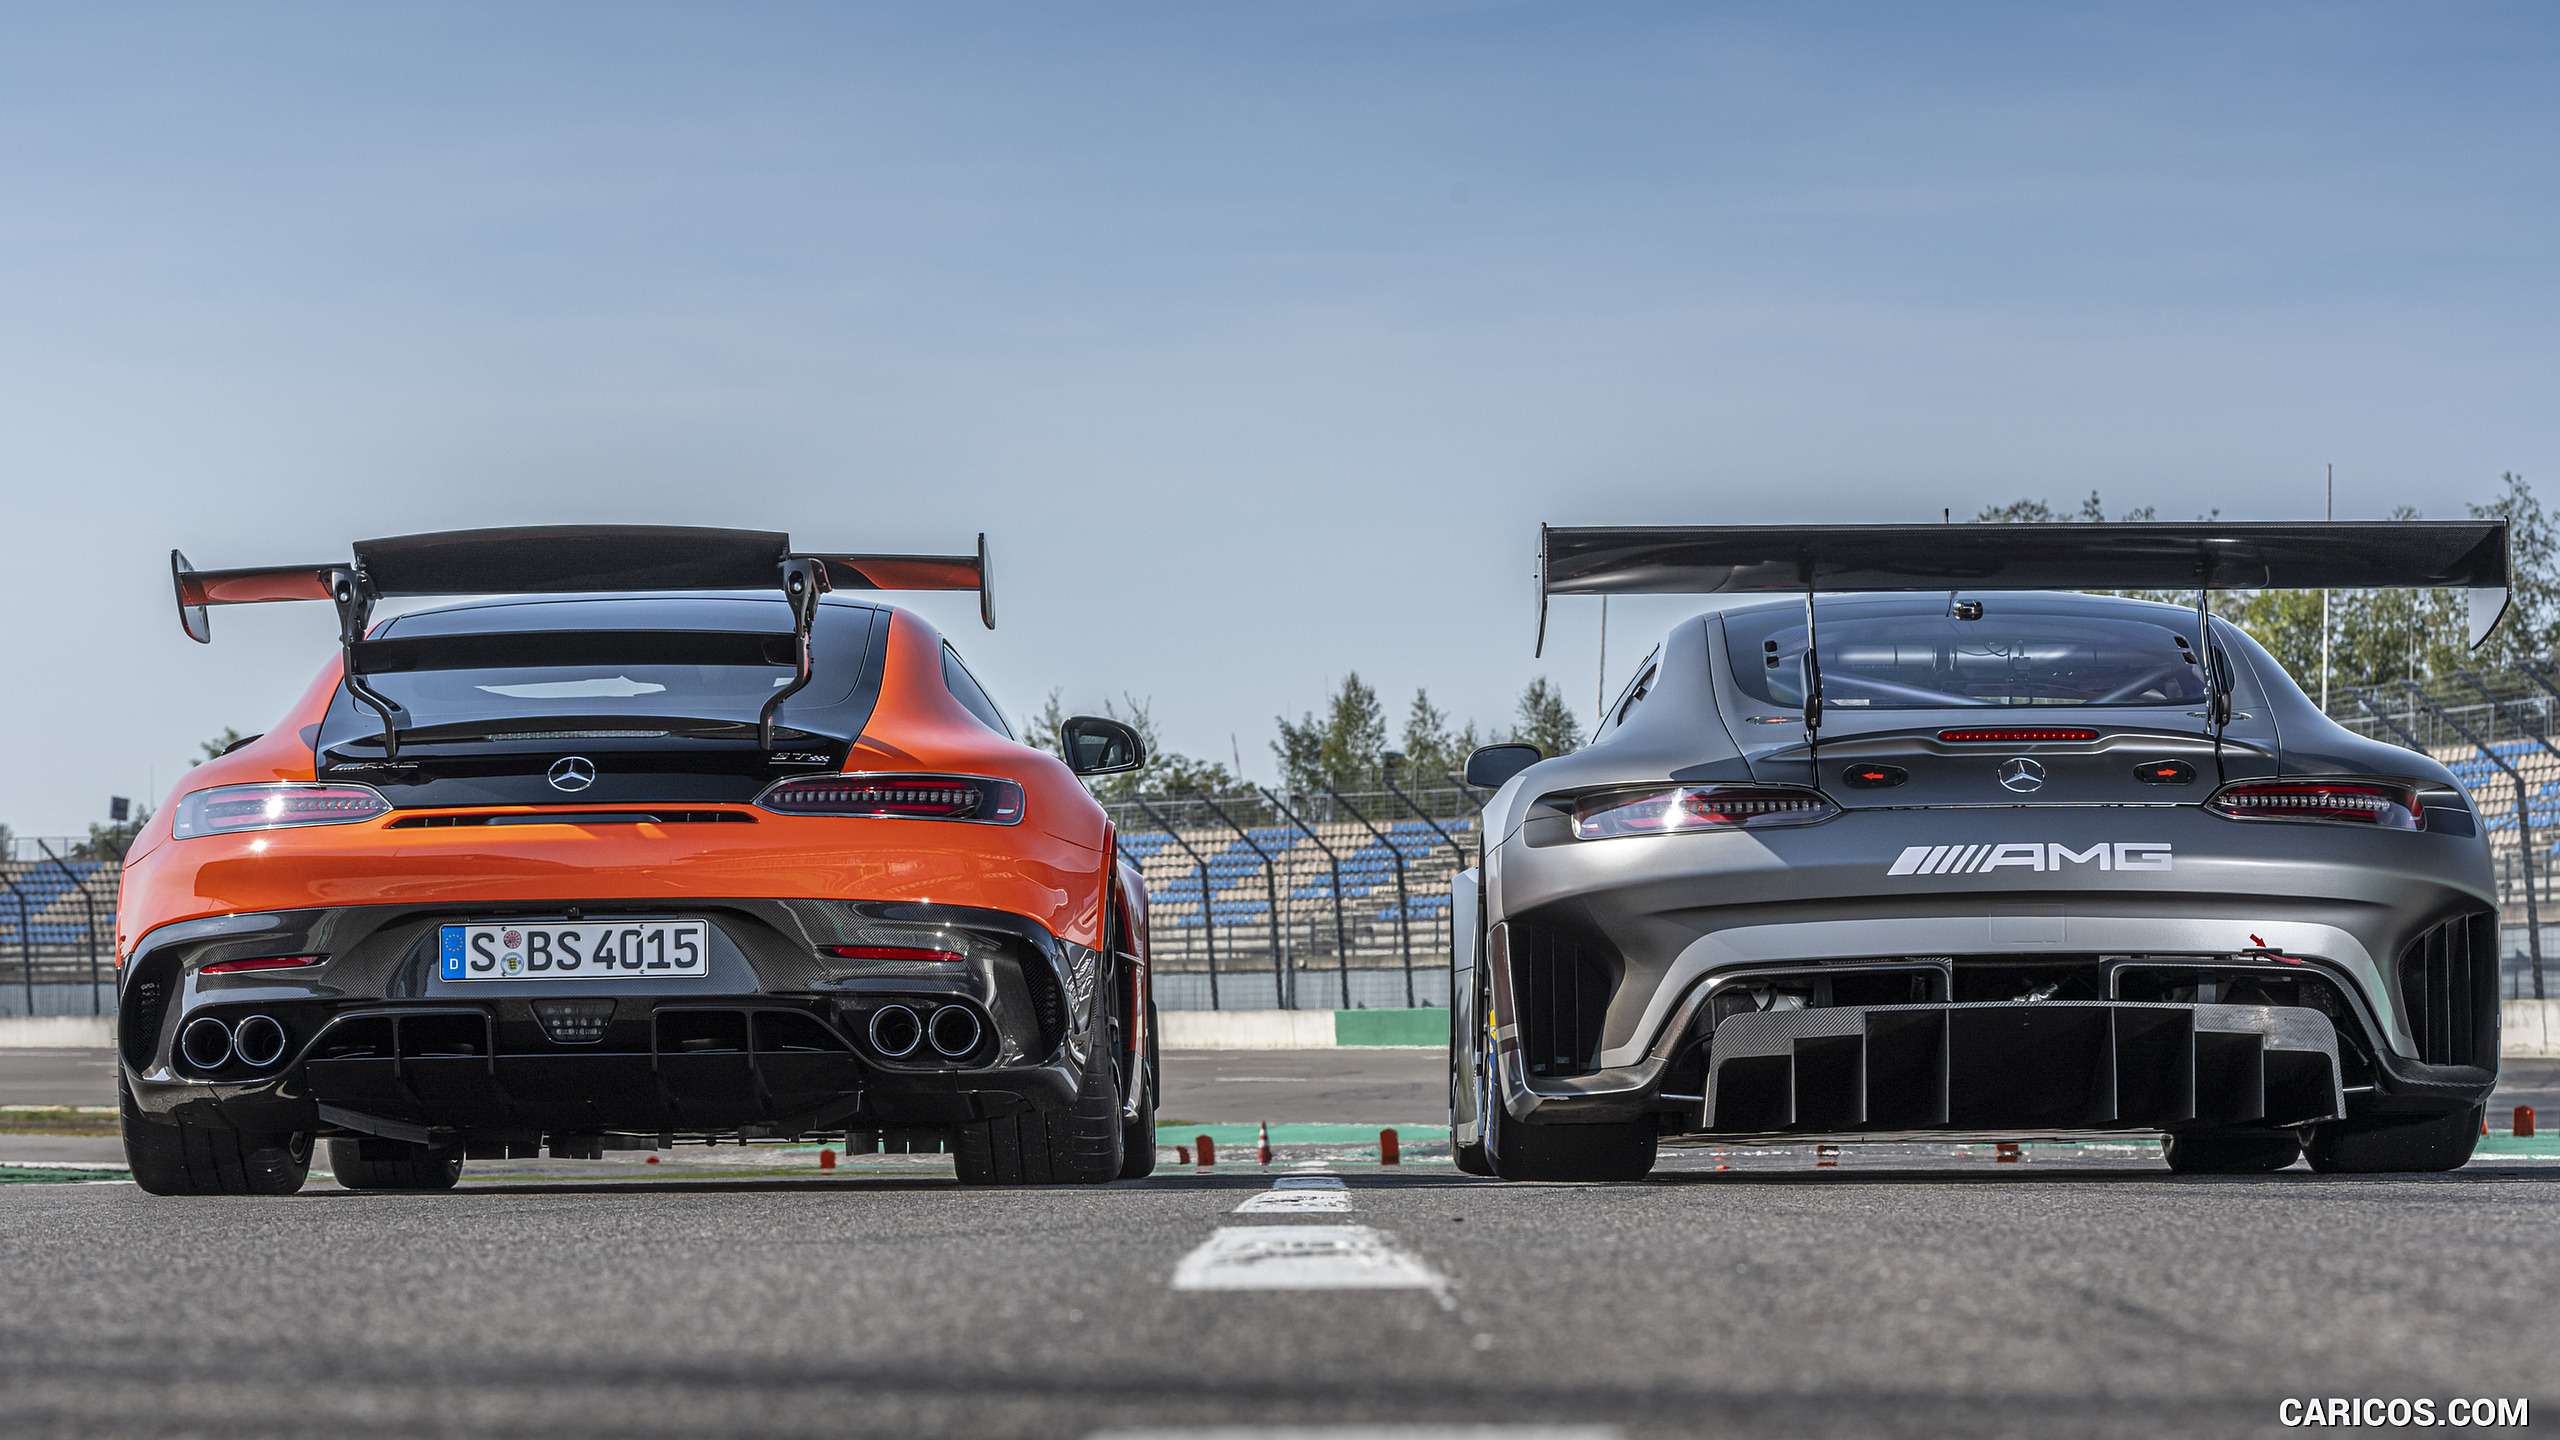 2021 Mercedes-AMG GT Black Series (Color: Magma Beam) and AMG GT3 Racing Car, #151 of 215